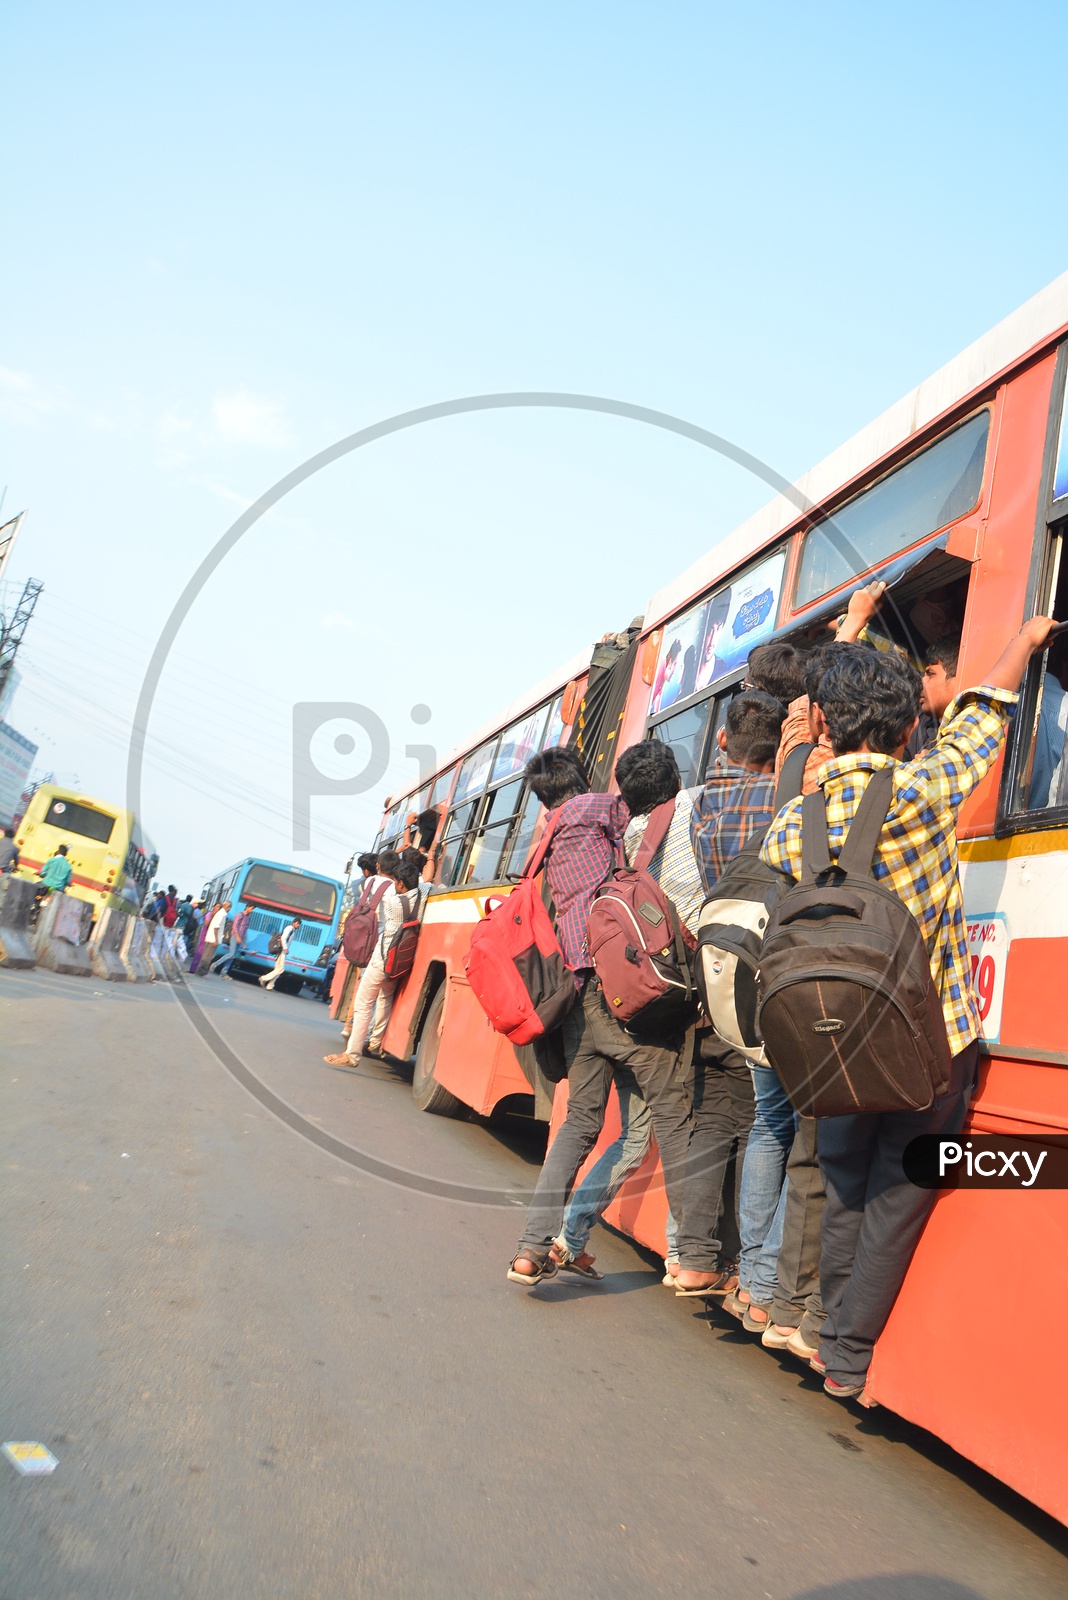 Foot board Commuting In a City Bus In Hyderabad city